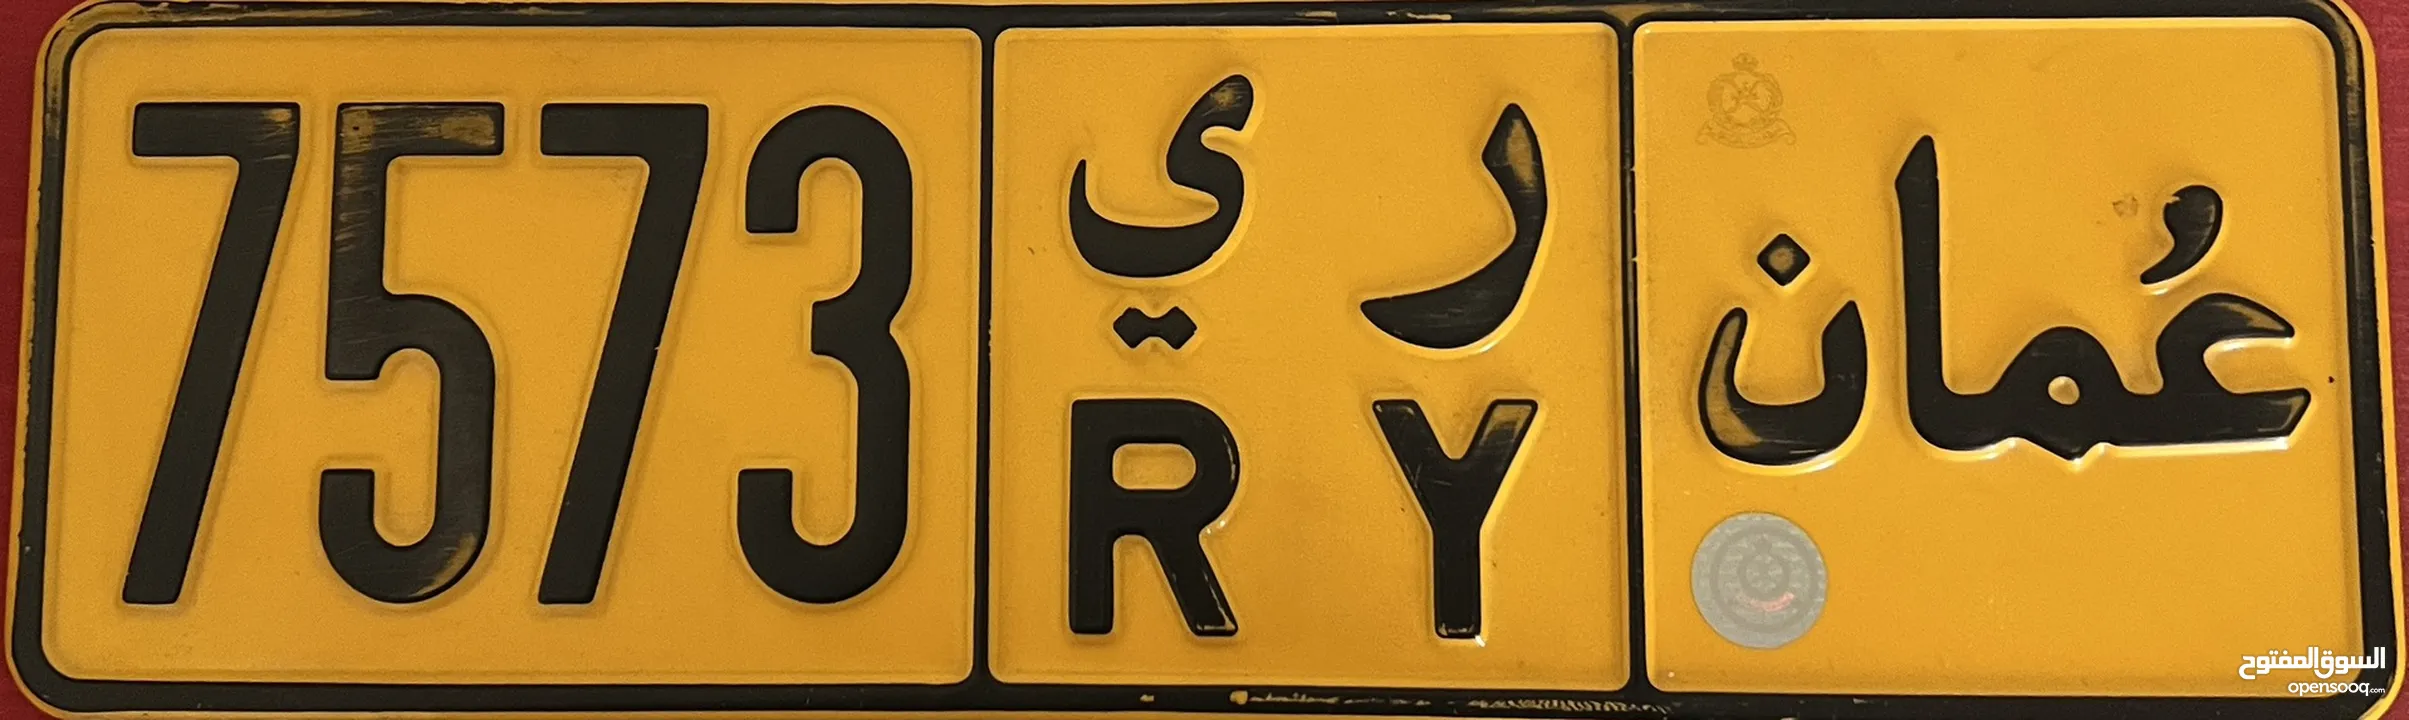 RY 7573 Number Plates